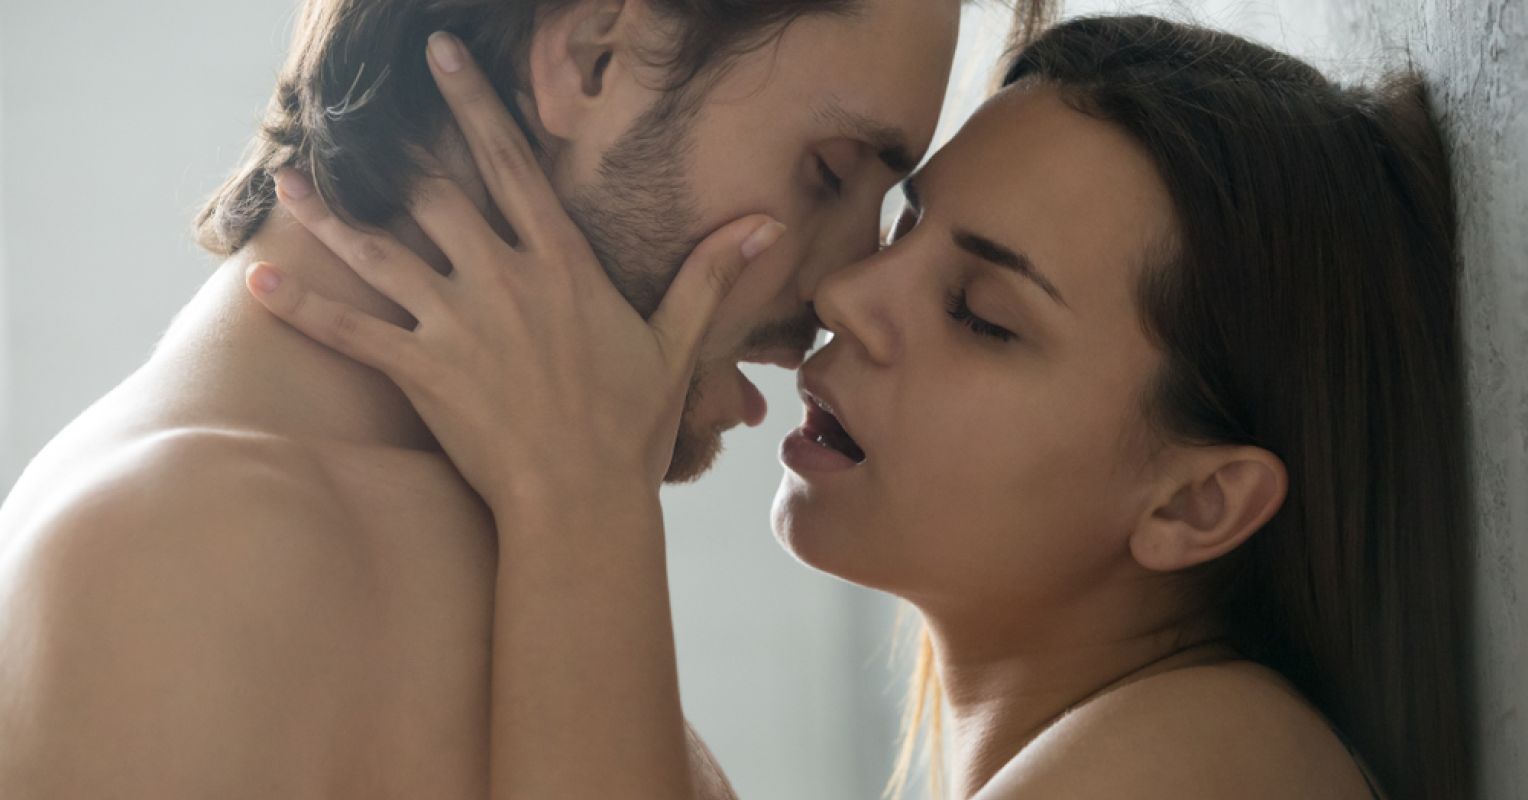 Why We Scream and Moan During Sex Psychology Today picture